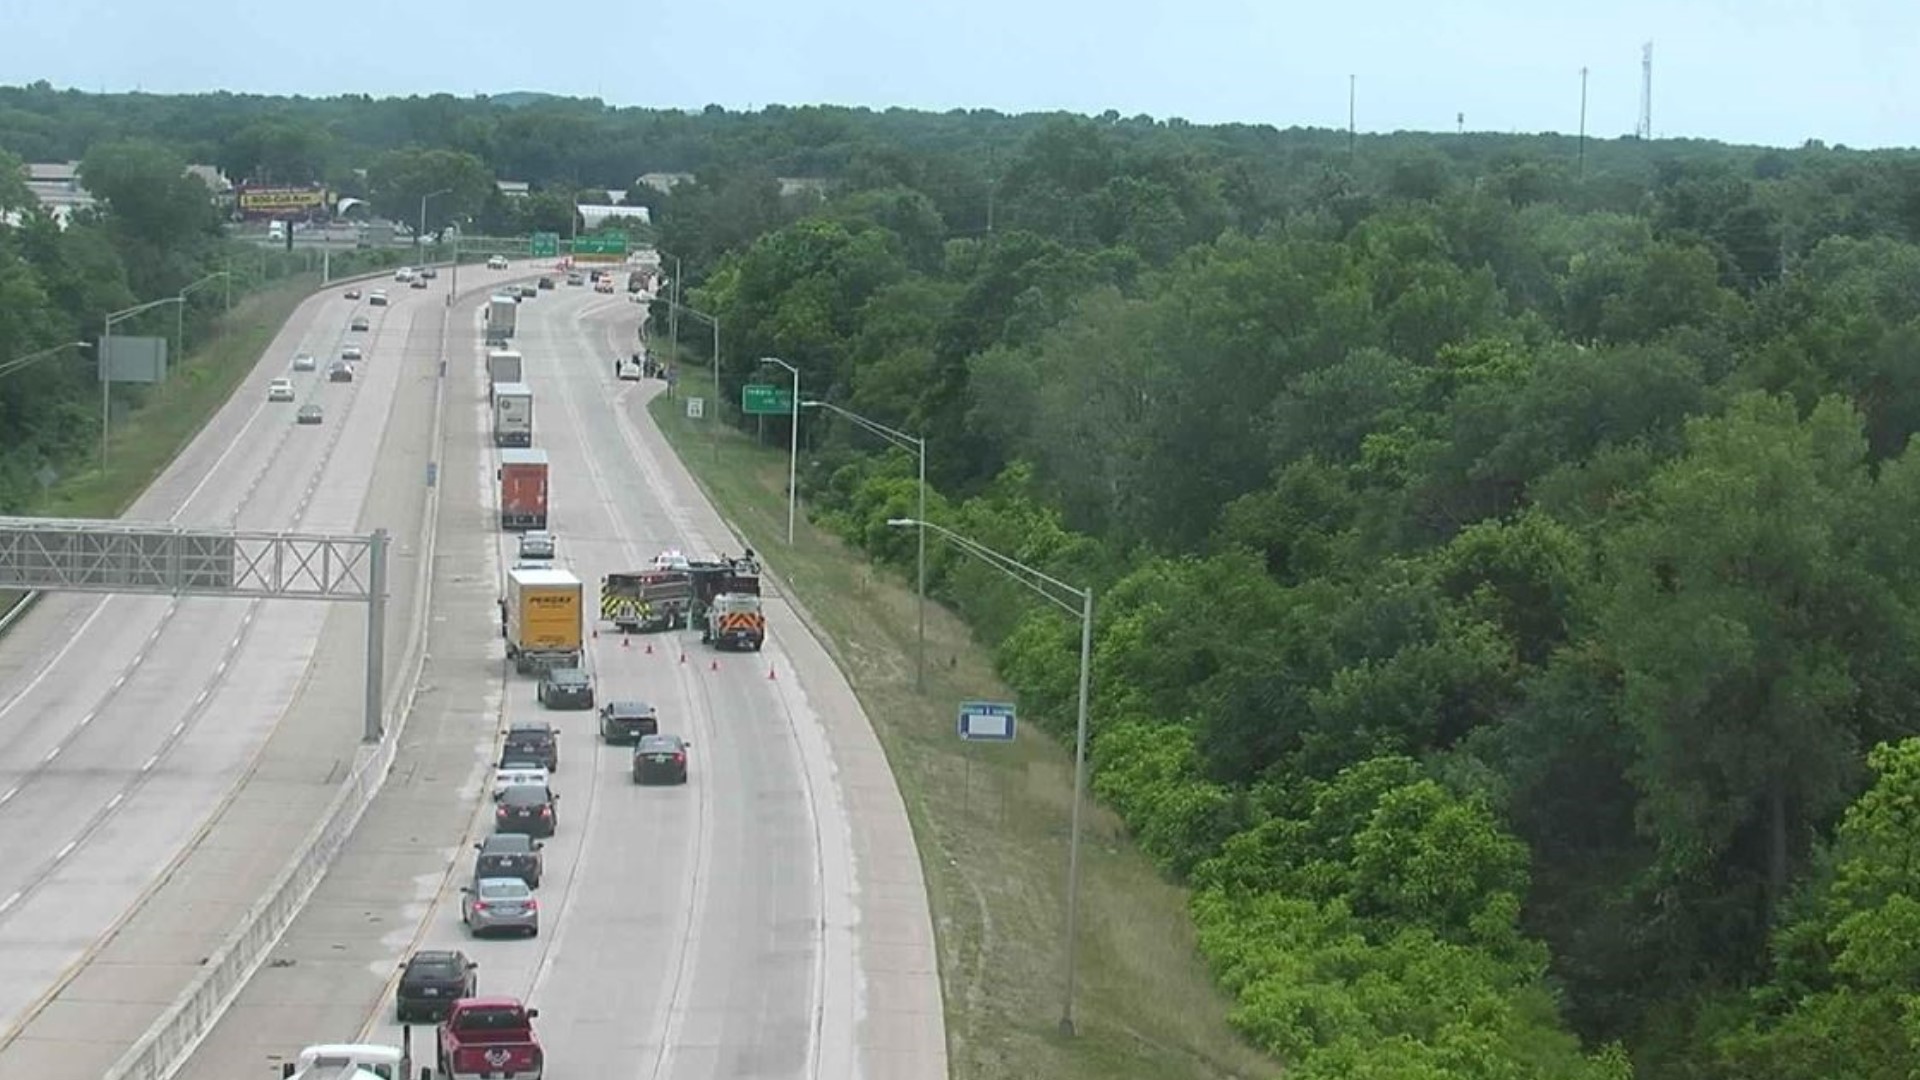 The incident happened around 2 p.m. on I-70 westbound just south of Minnesota Street.